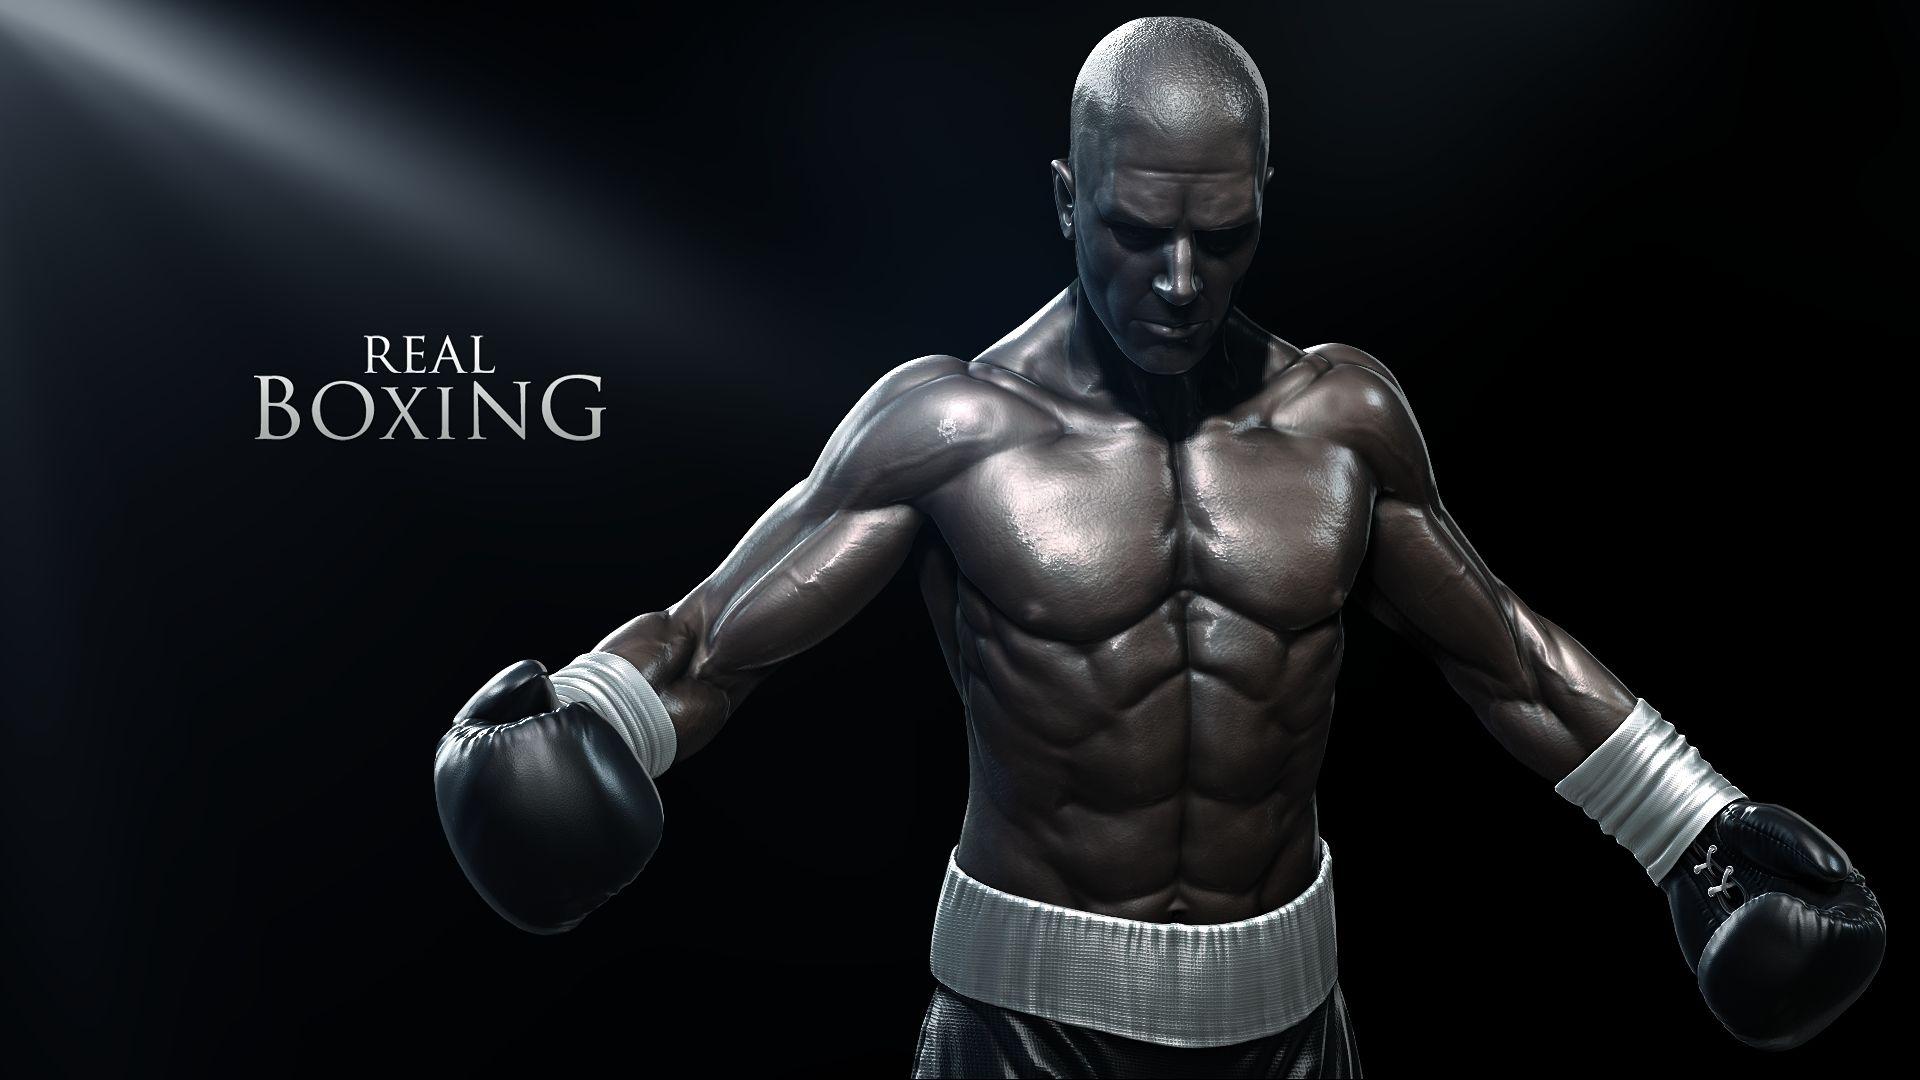 Real Boxing Full HD Wallpaper and Background Imagex1080